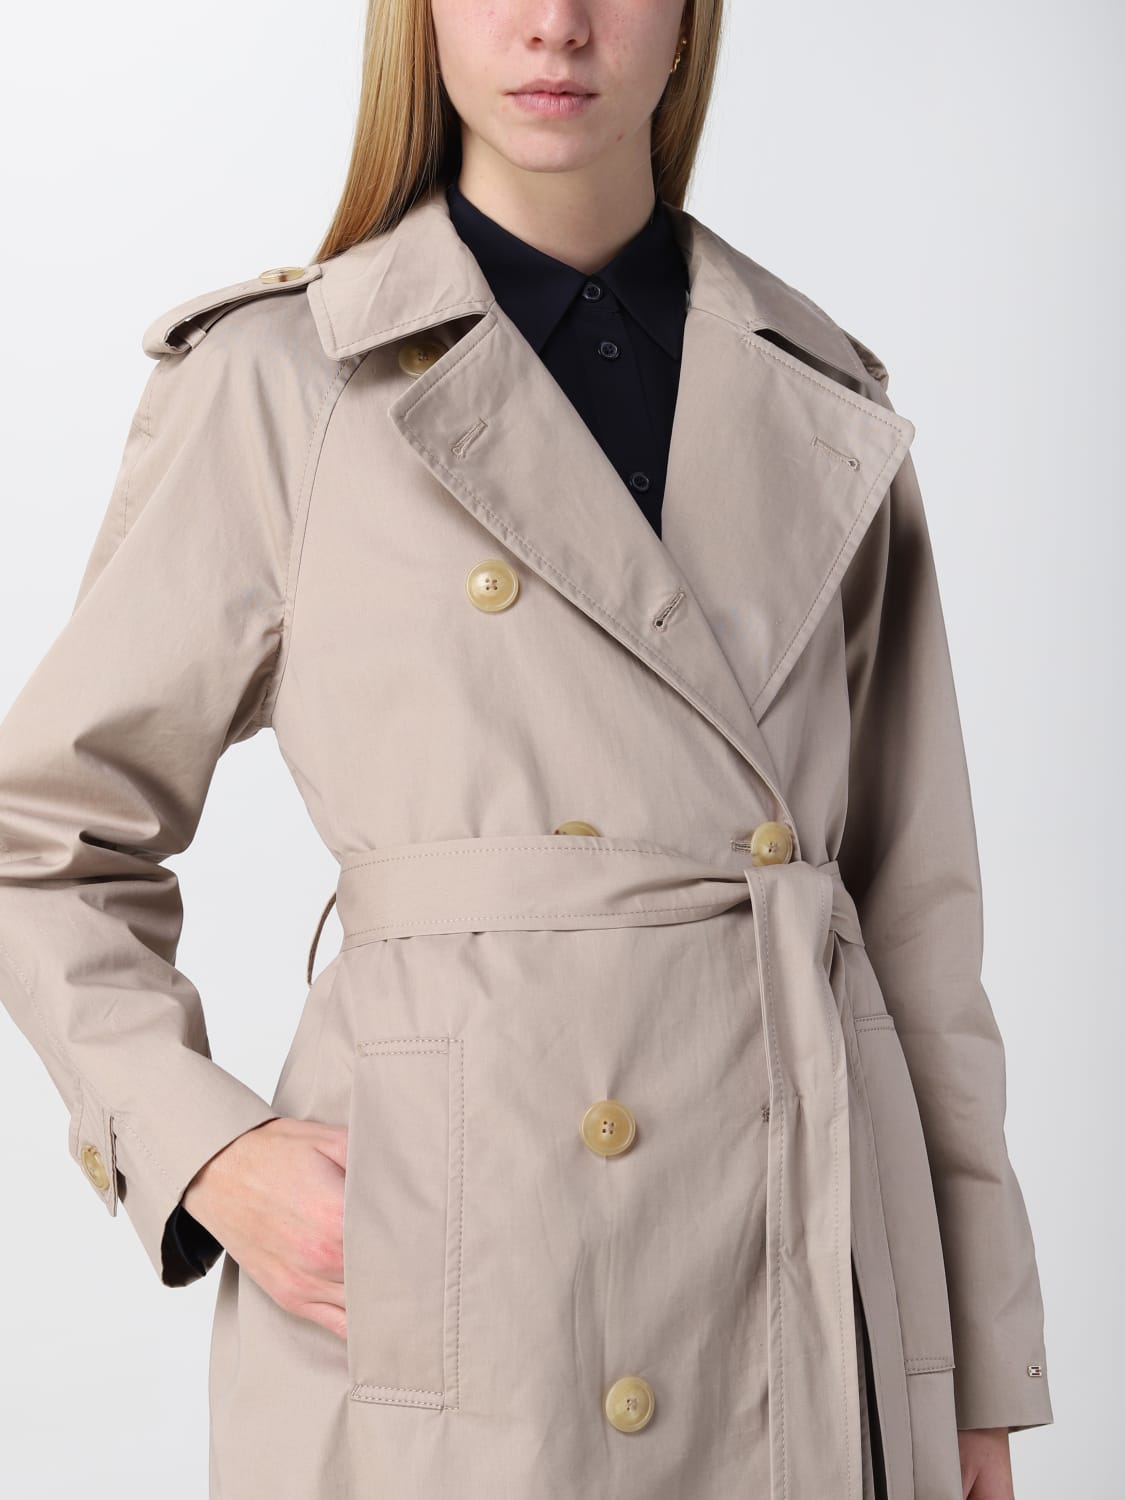 TOMMY HILFIGER: trench coat for woman Beige | Tommy Hilfiger trench coat WW0WW36960 online on GIGLIO.COM